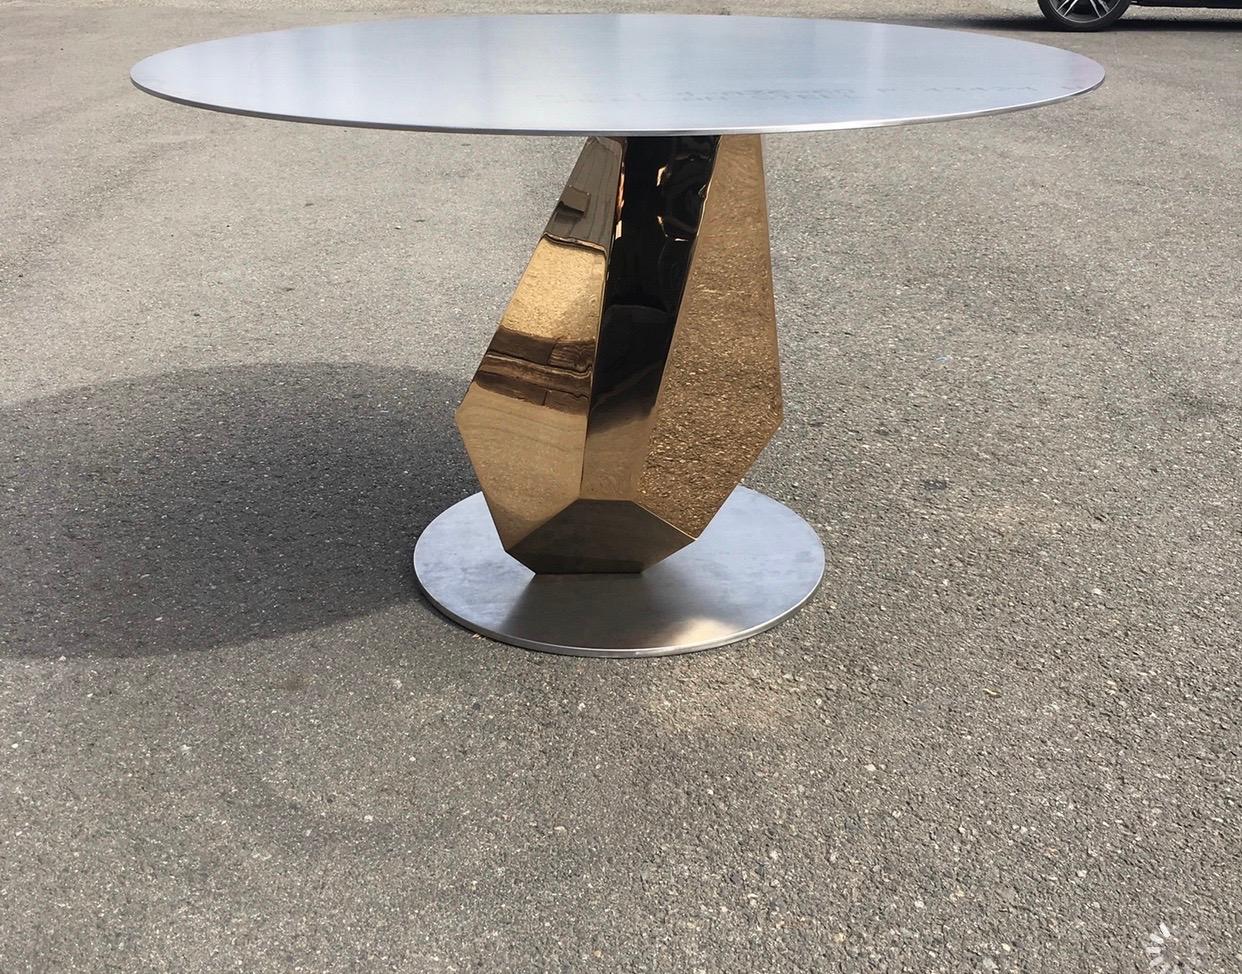 Geometric Sculptural Metal Table Mirror Polished Bronze & Blackened In Stock In New Condition For Sale In Seattle, WA